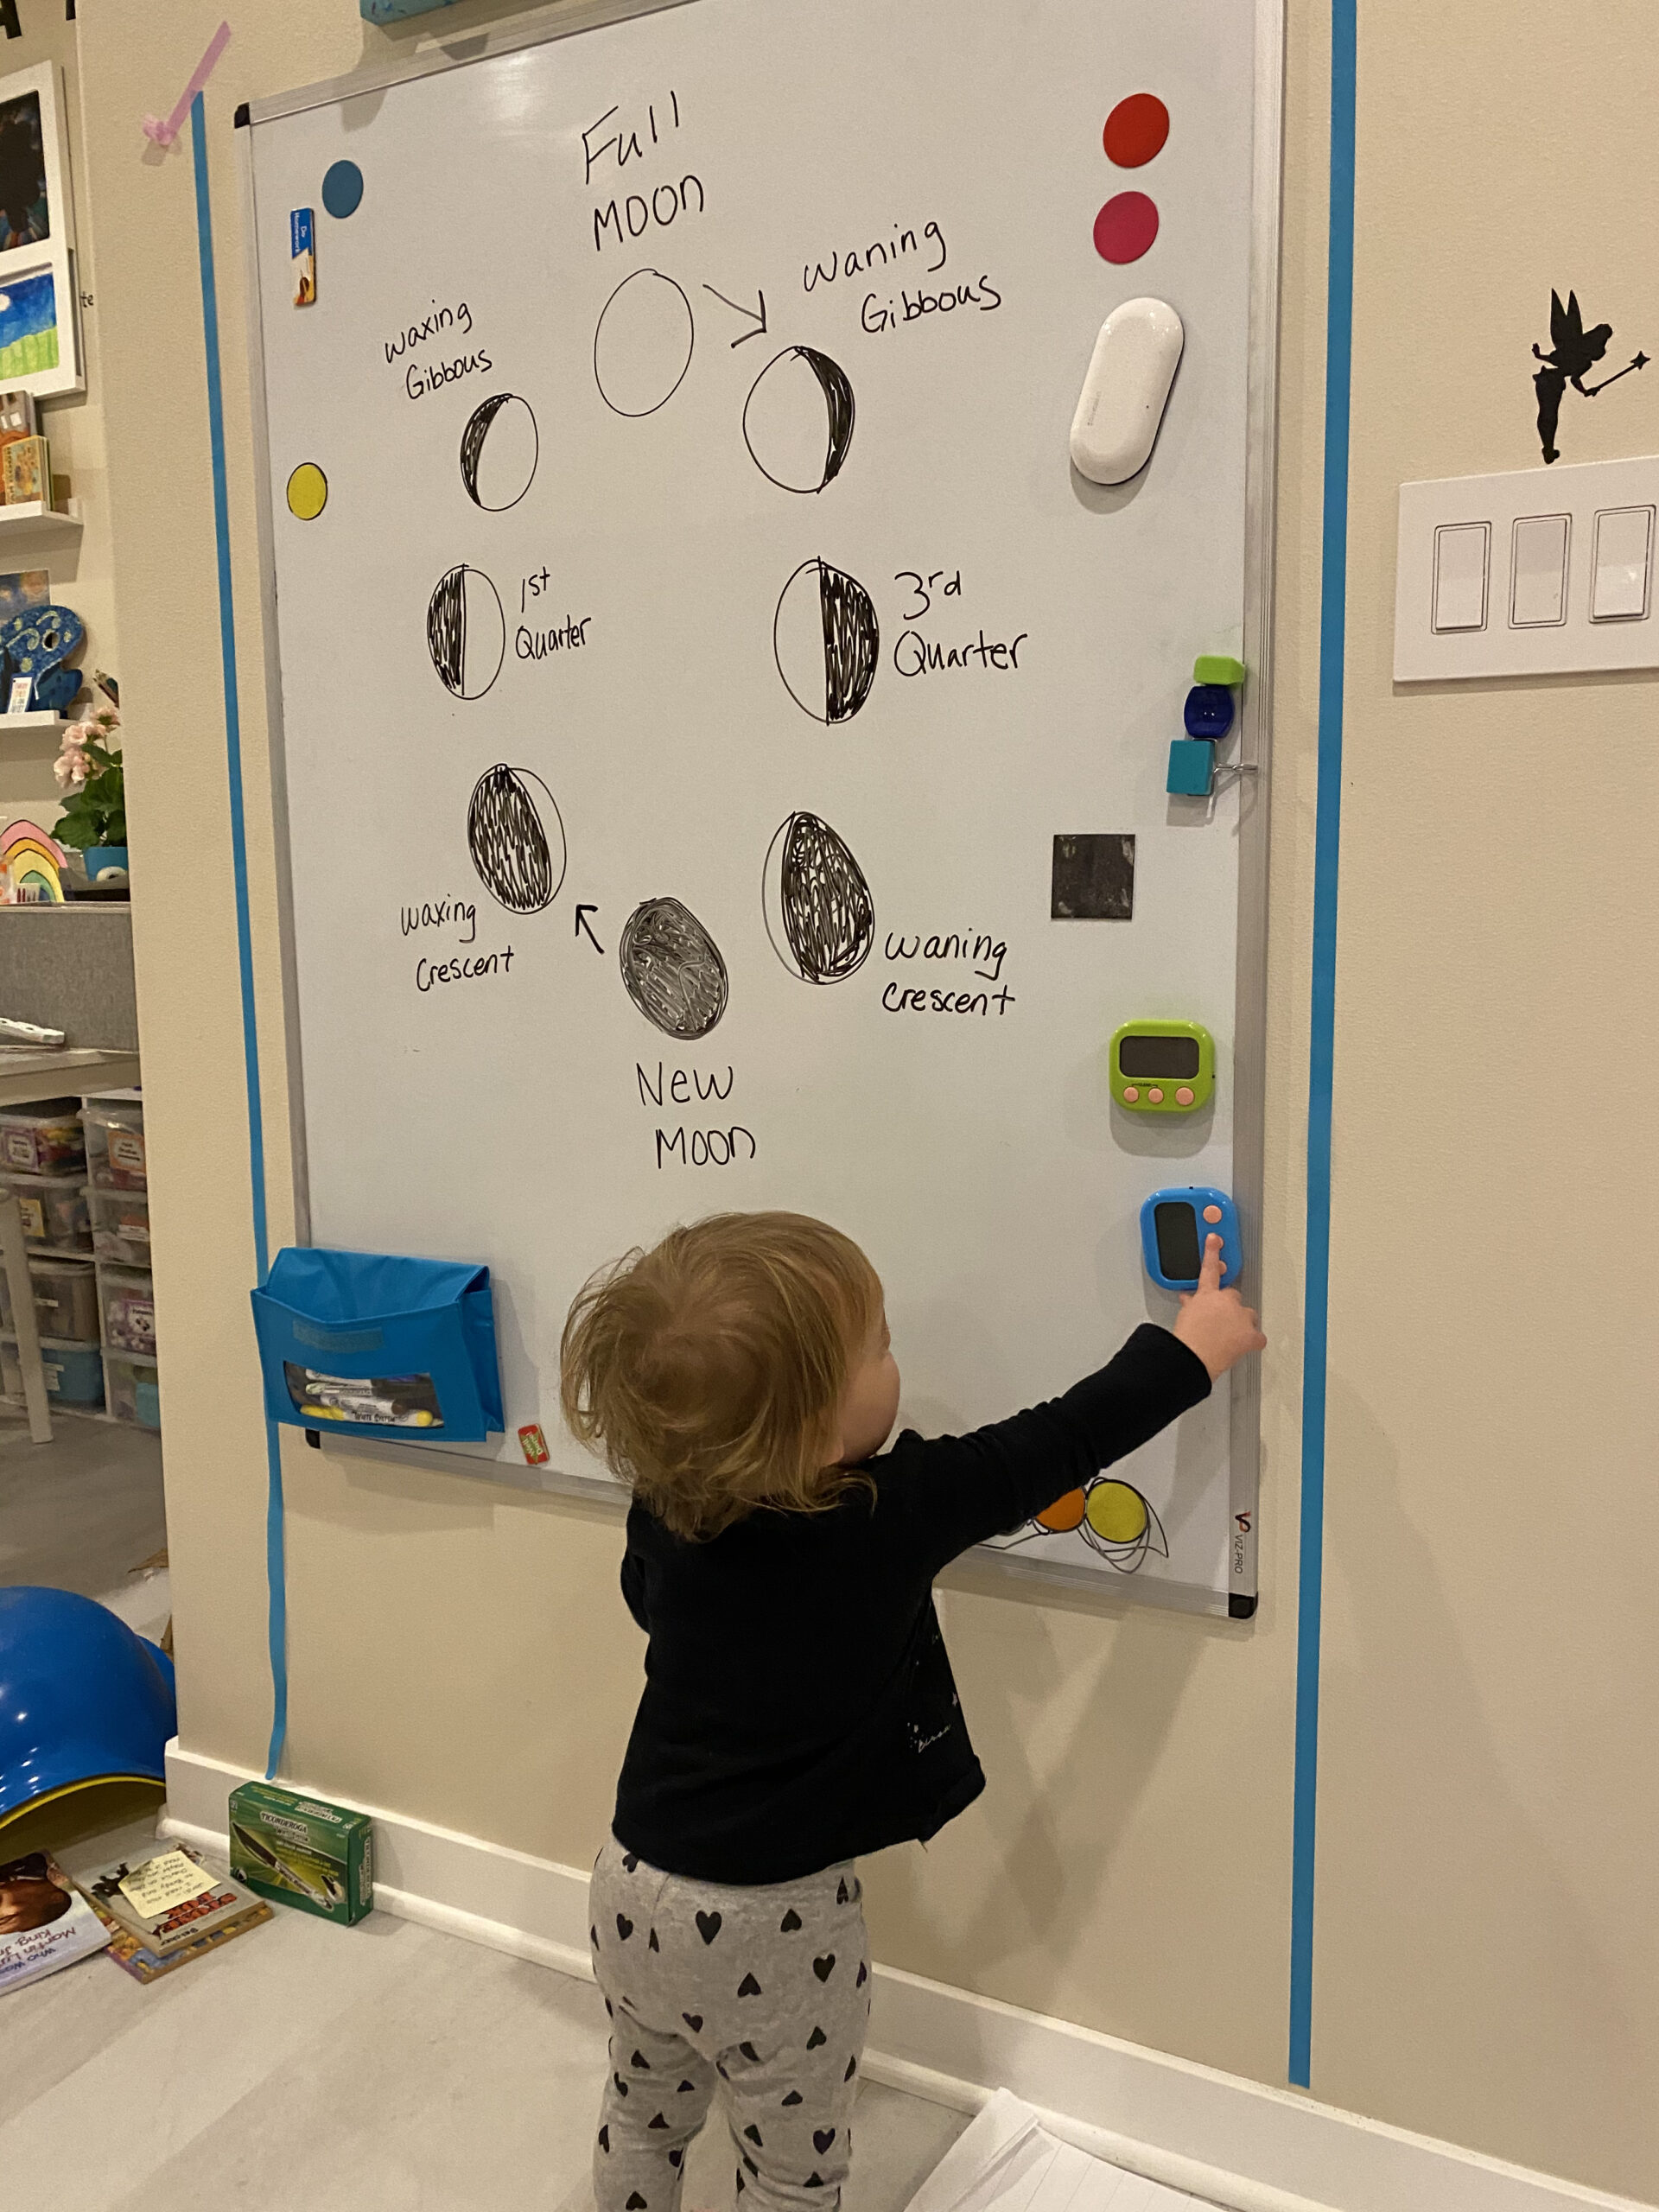 Phases of the Moon: As the moon orbits the Earth, different amounts of light are reflected off the surface of the moon. A fun way to teach the phases of the moon is the hands-on activity. Being able to snack on the activity is a bonus!